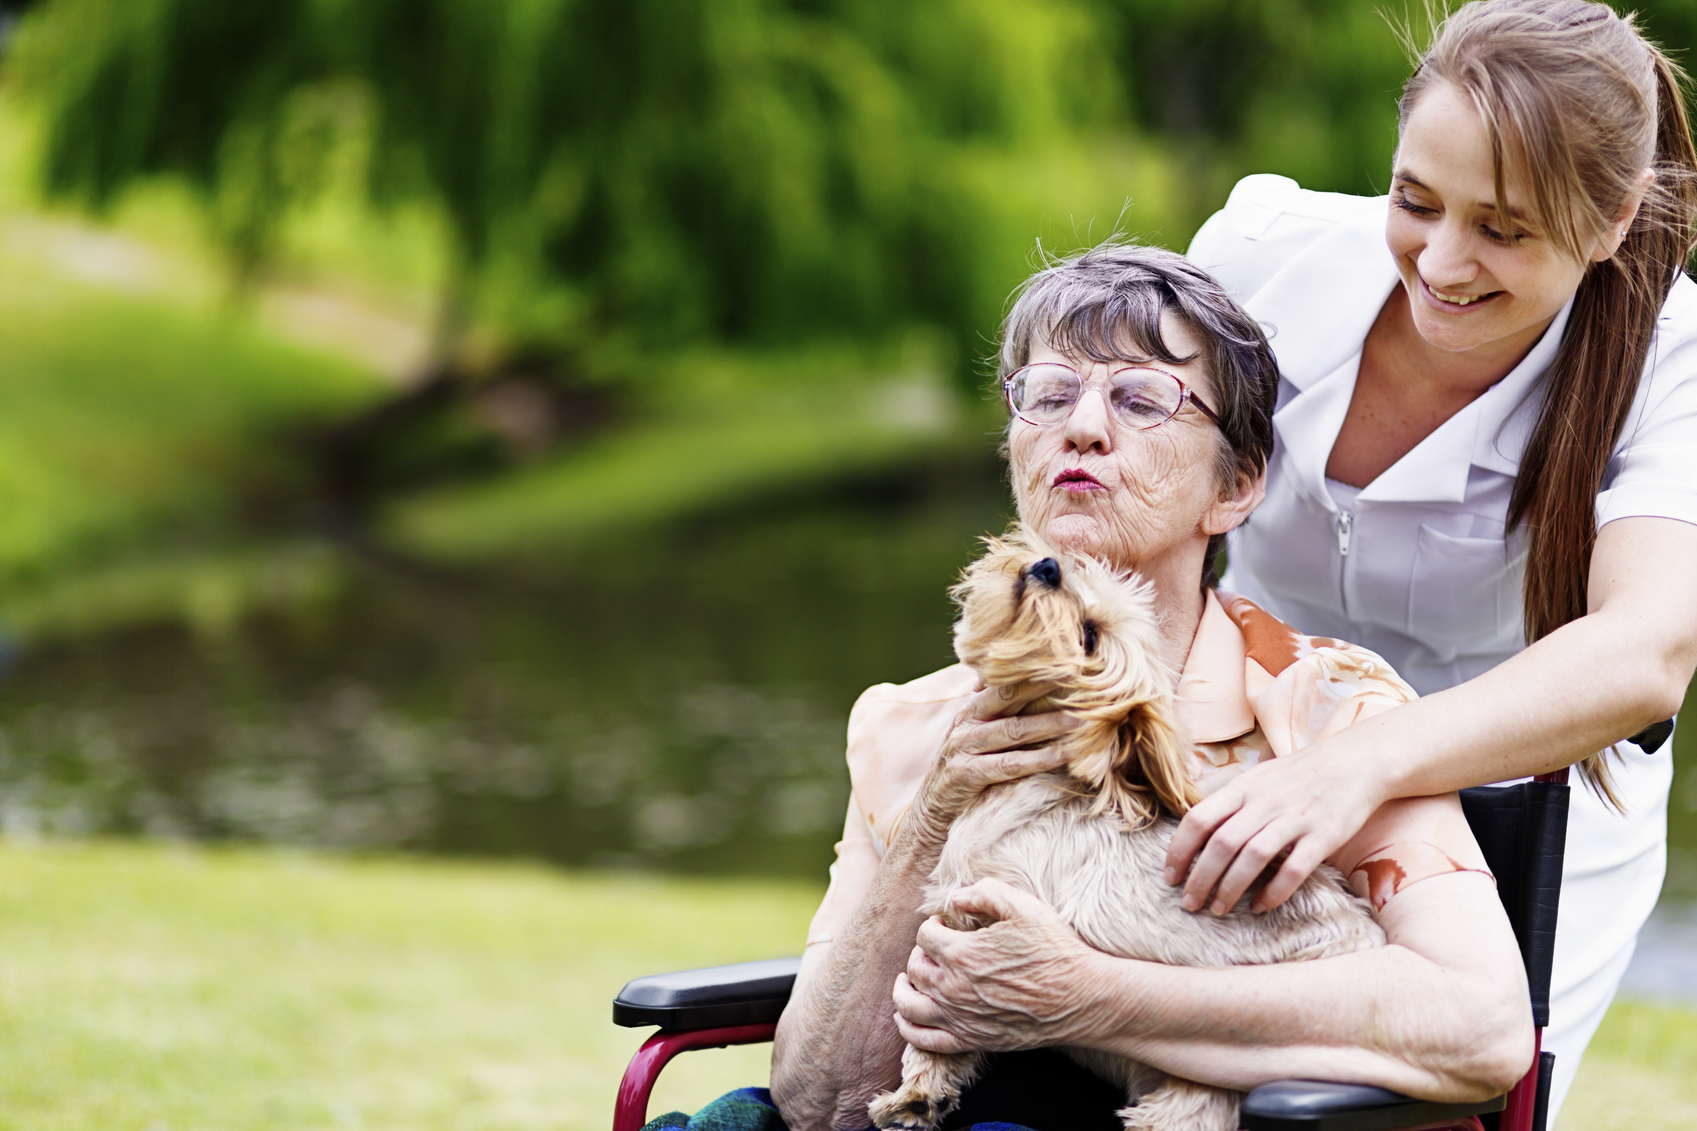 An old woman in a wheelchair cuddles her pet dog on her lap, her nurse looking on, smiling, as they all spend some time relaxing in a park. Life is good! Copy space on out-of-focus greenery.